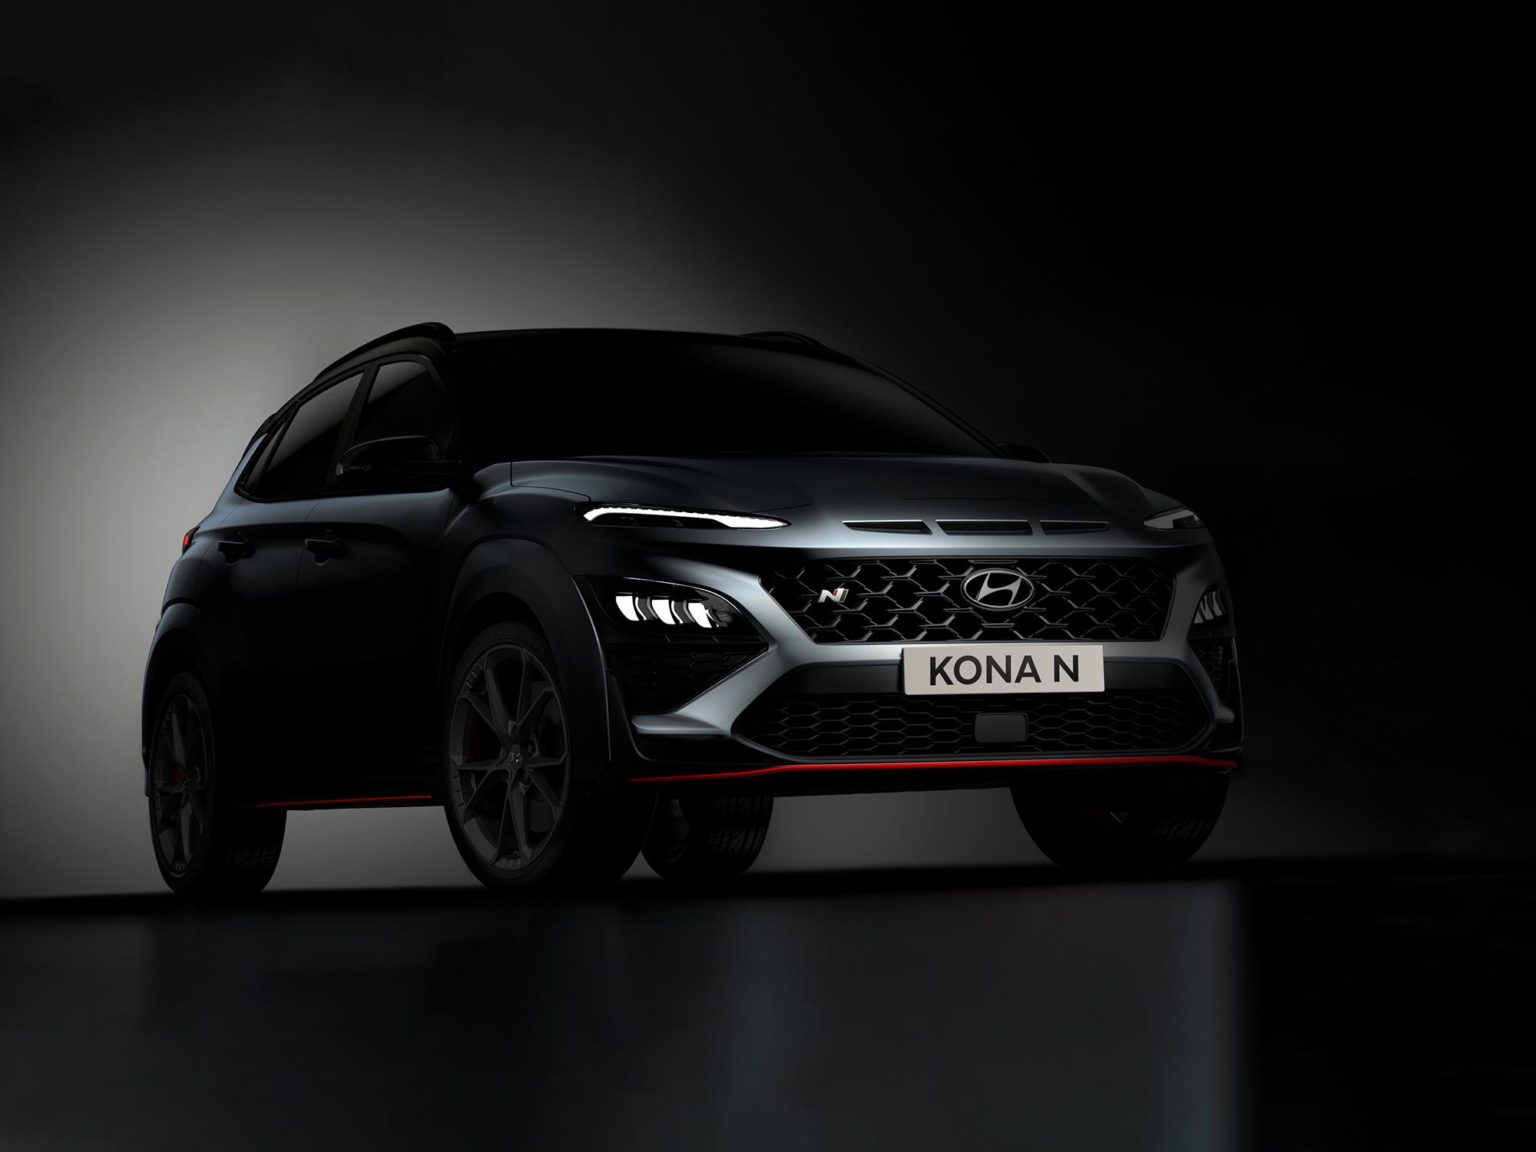 2022 Hyundai Kona N revealed, but the automaker isn't telling all just yet.